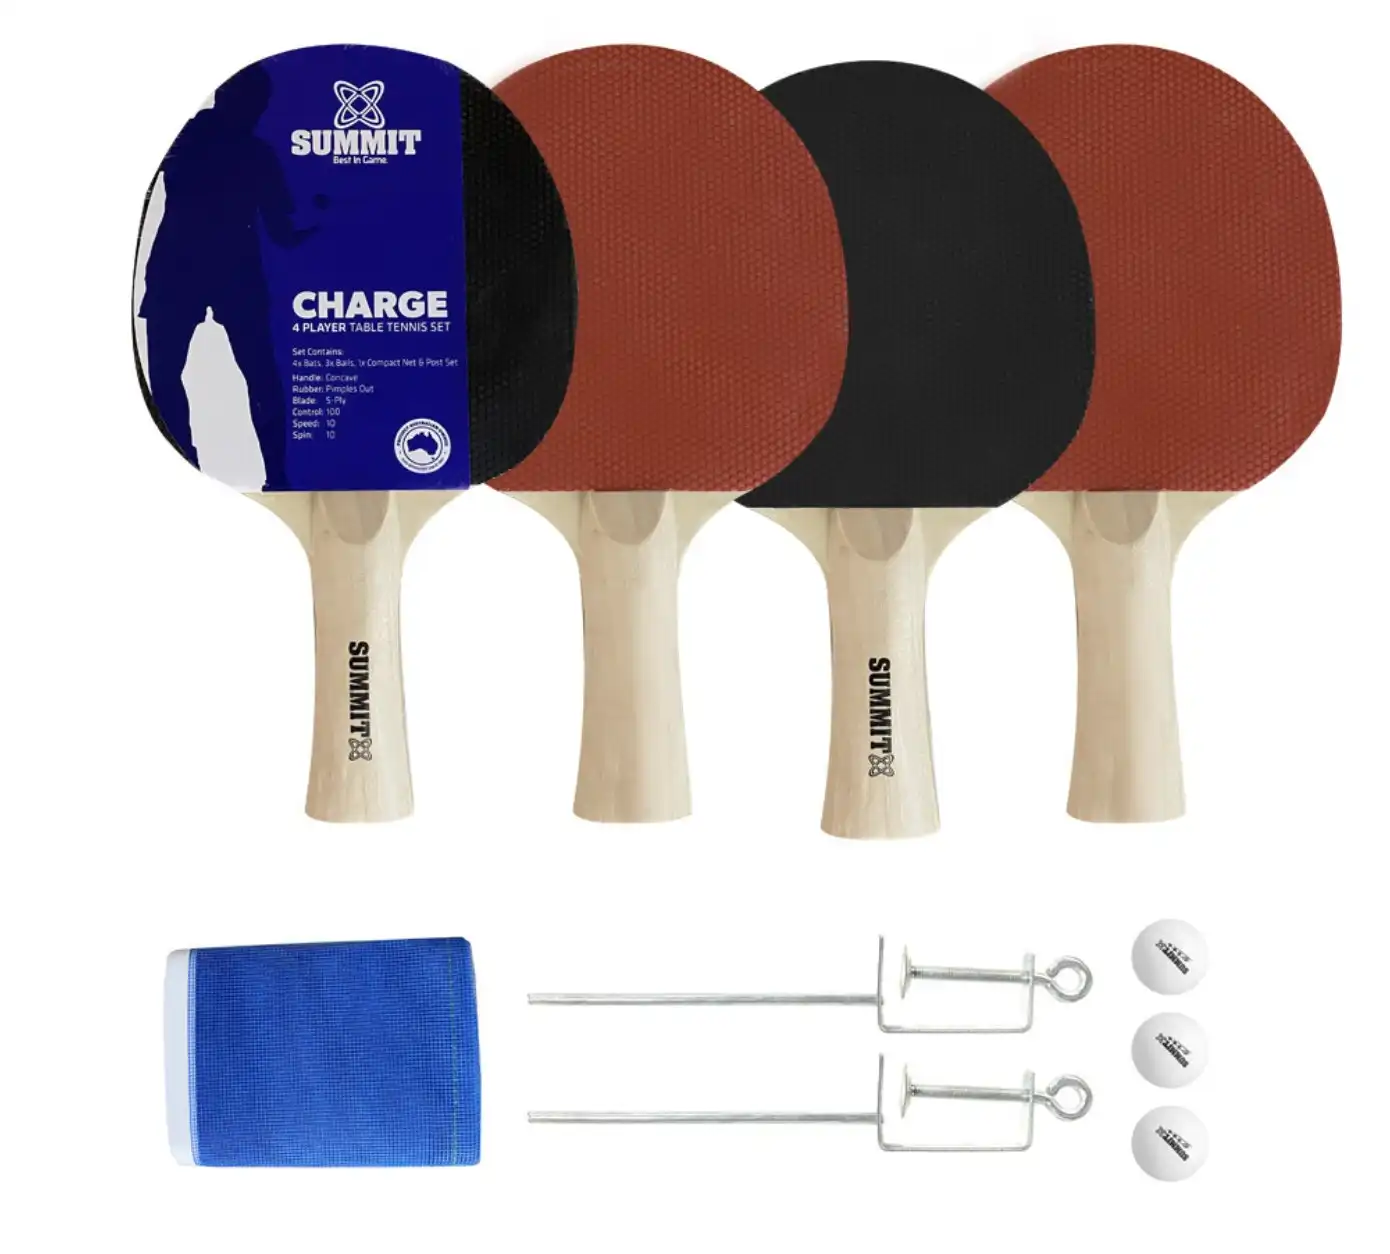 Summit Charge 4 Player Table Tennis Set Bats Balls Net Kit All In One